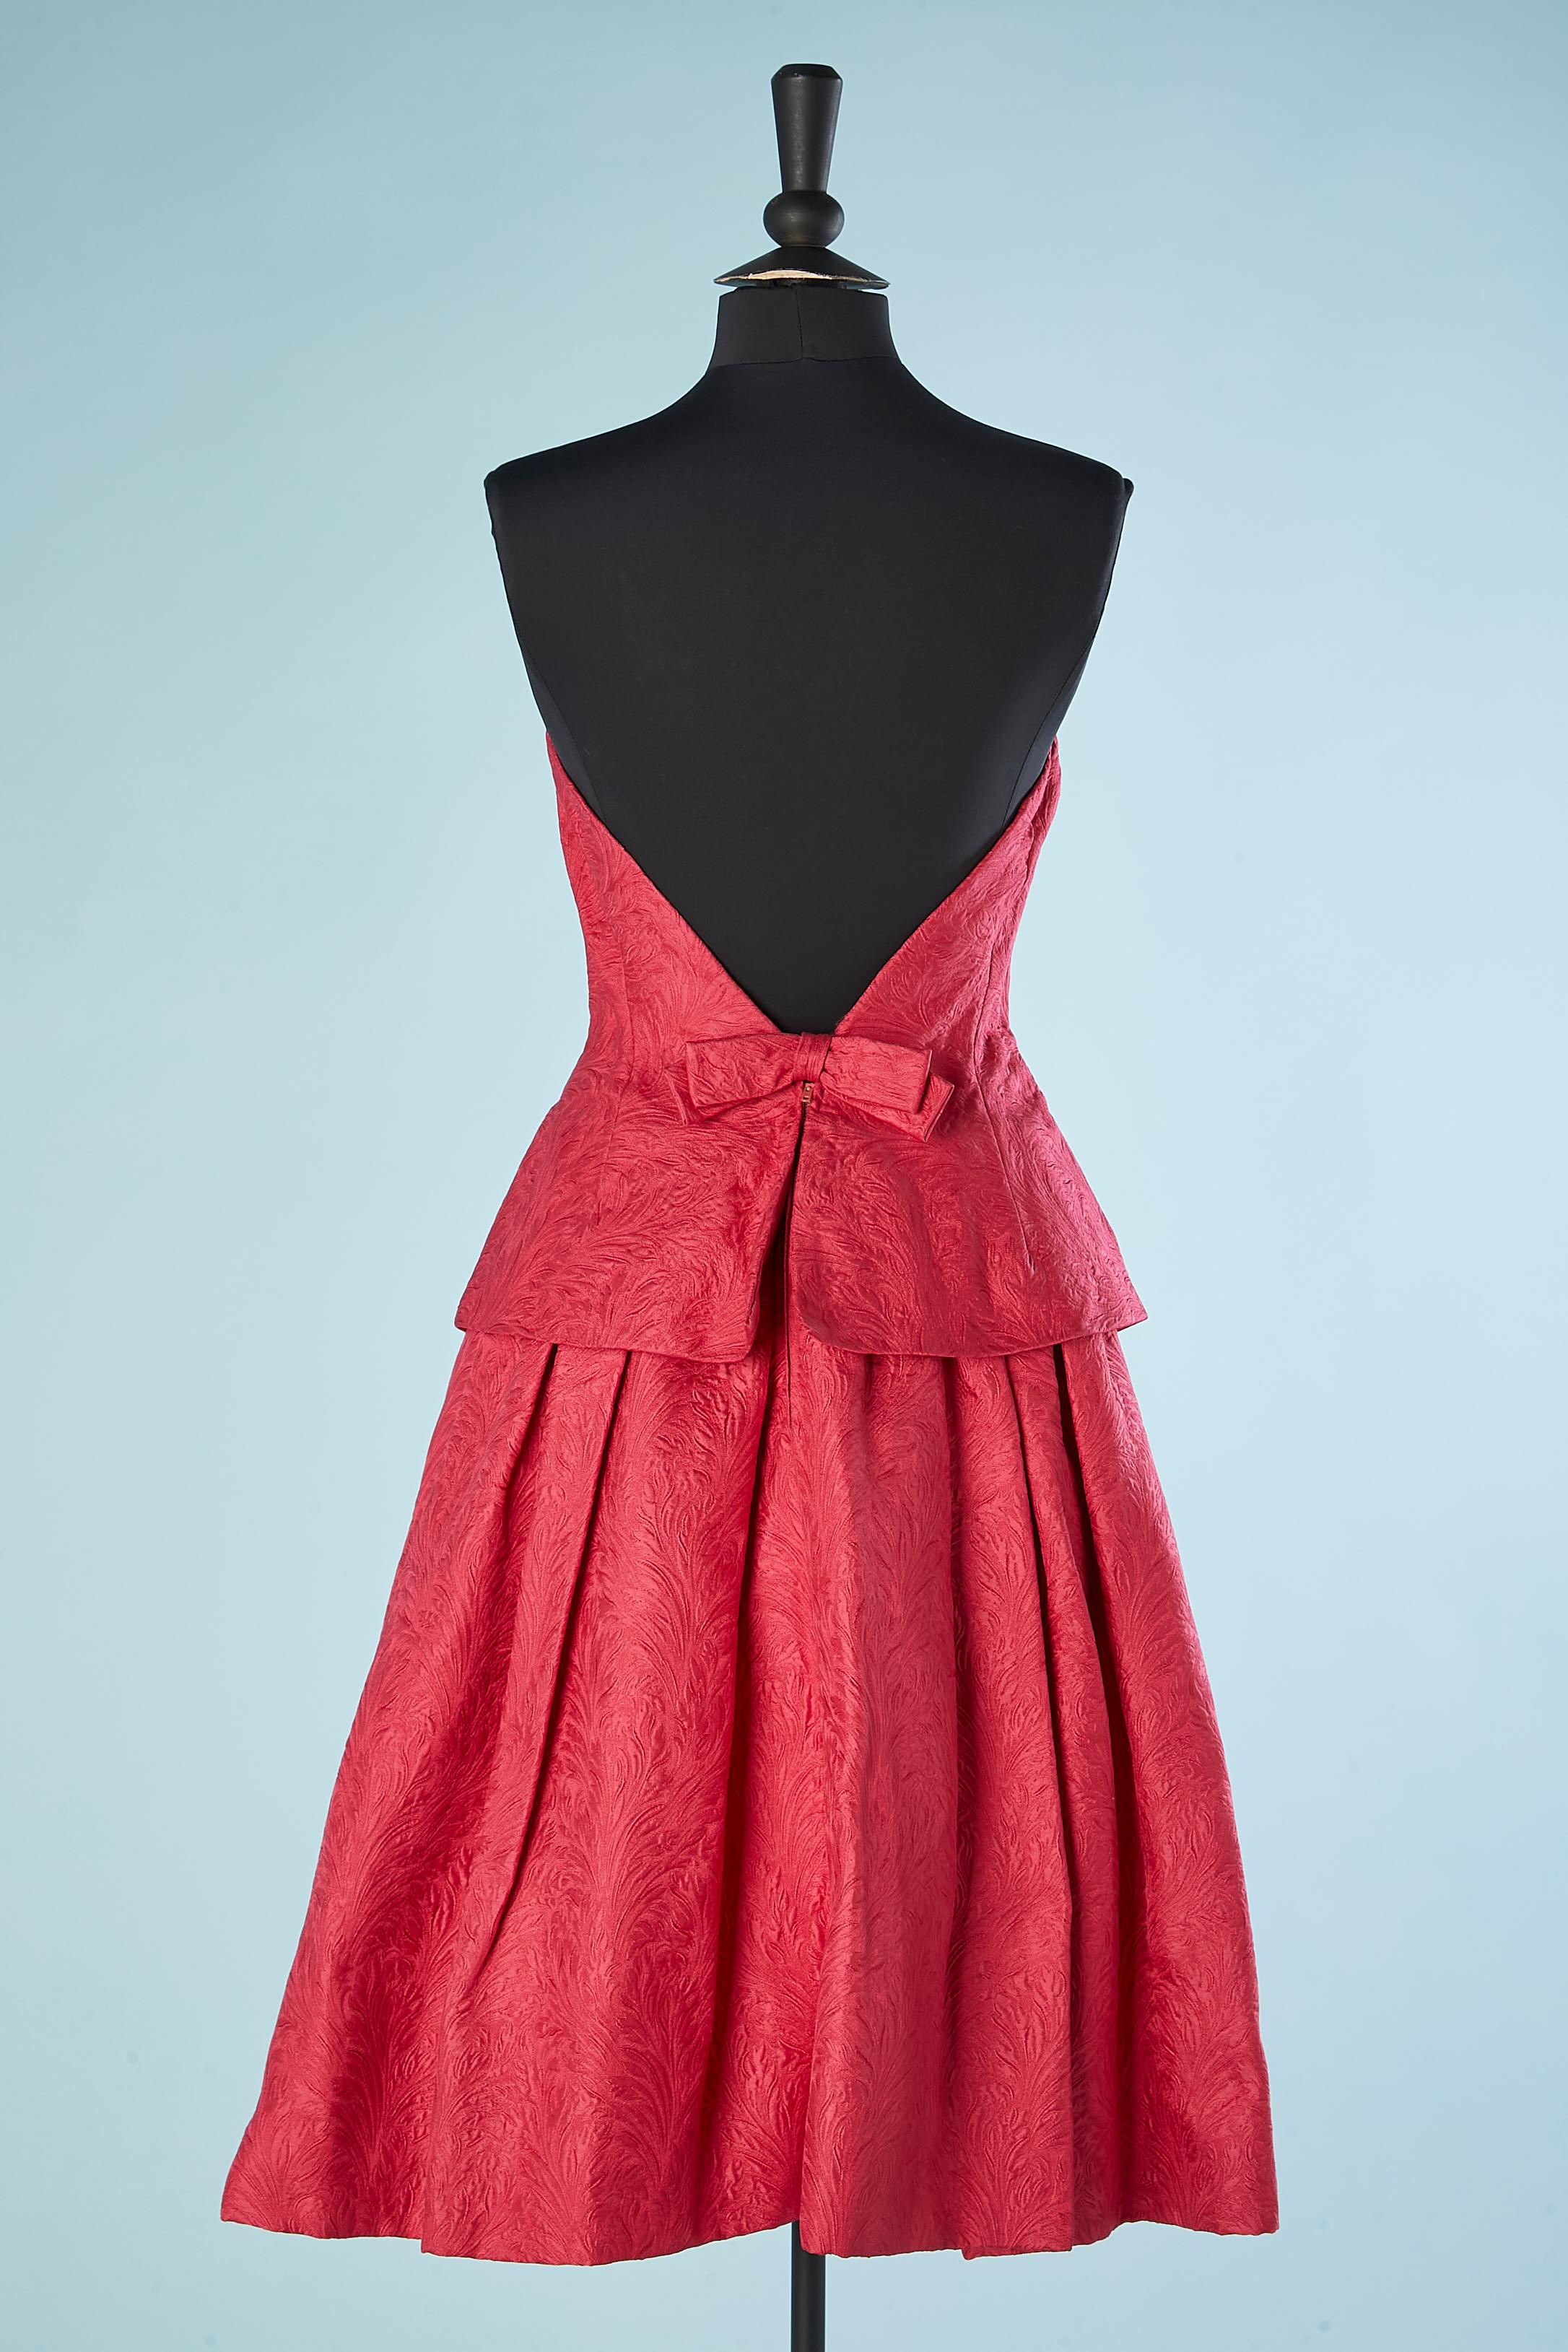 Pink damask bustier cocktail dress Circa 1950's  For Sale 1